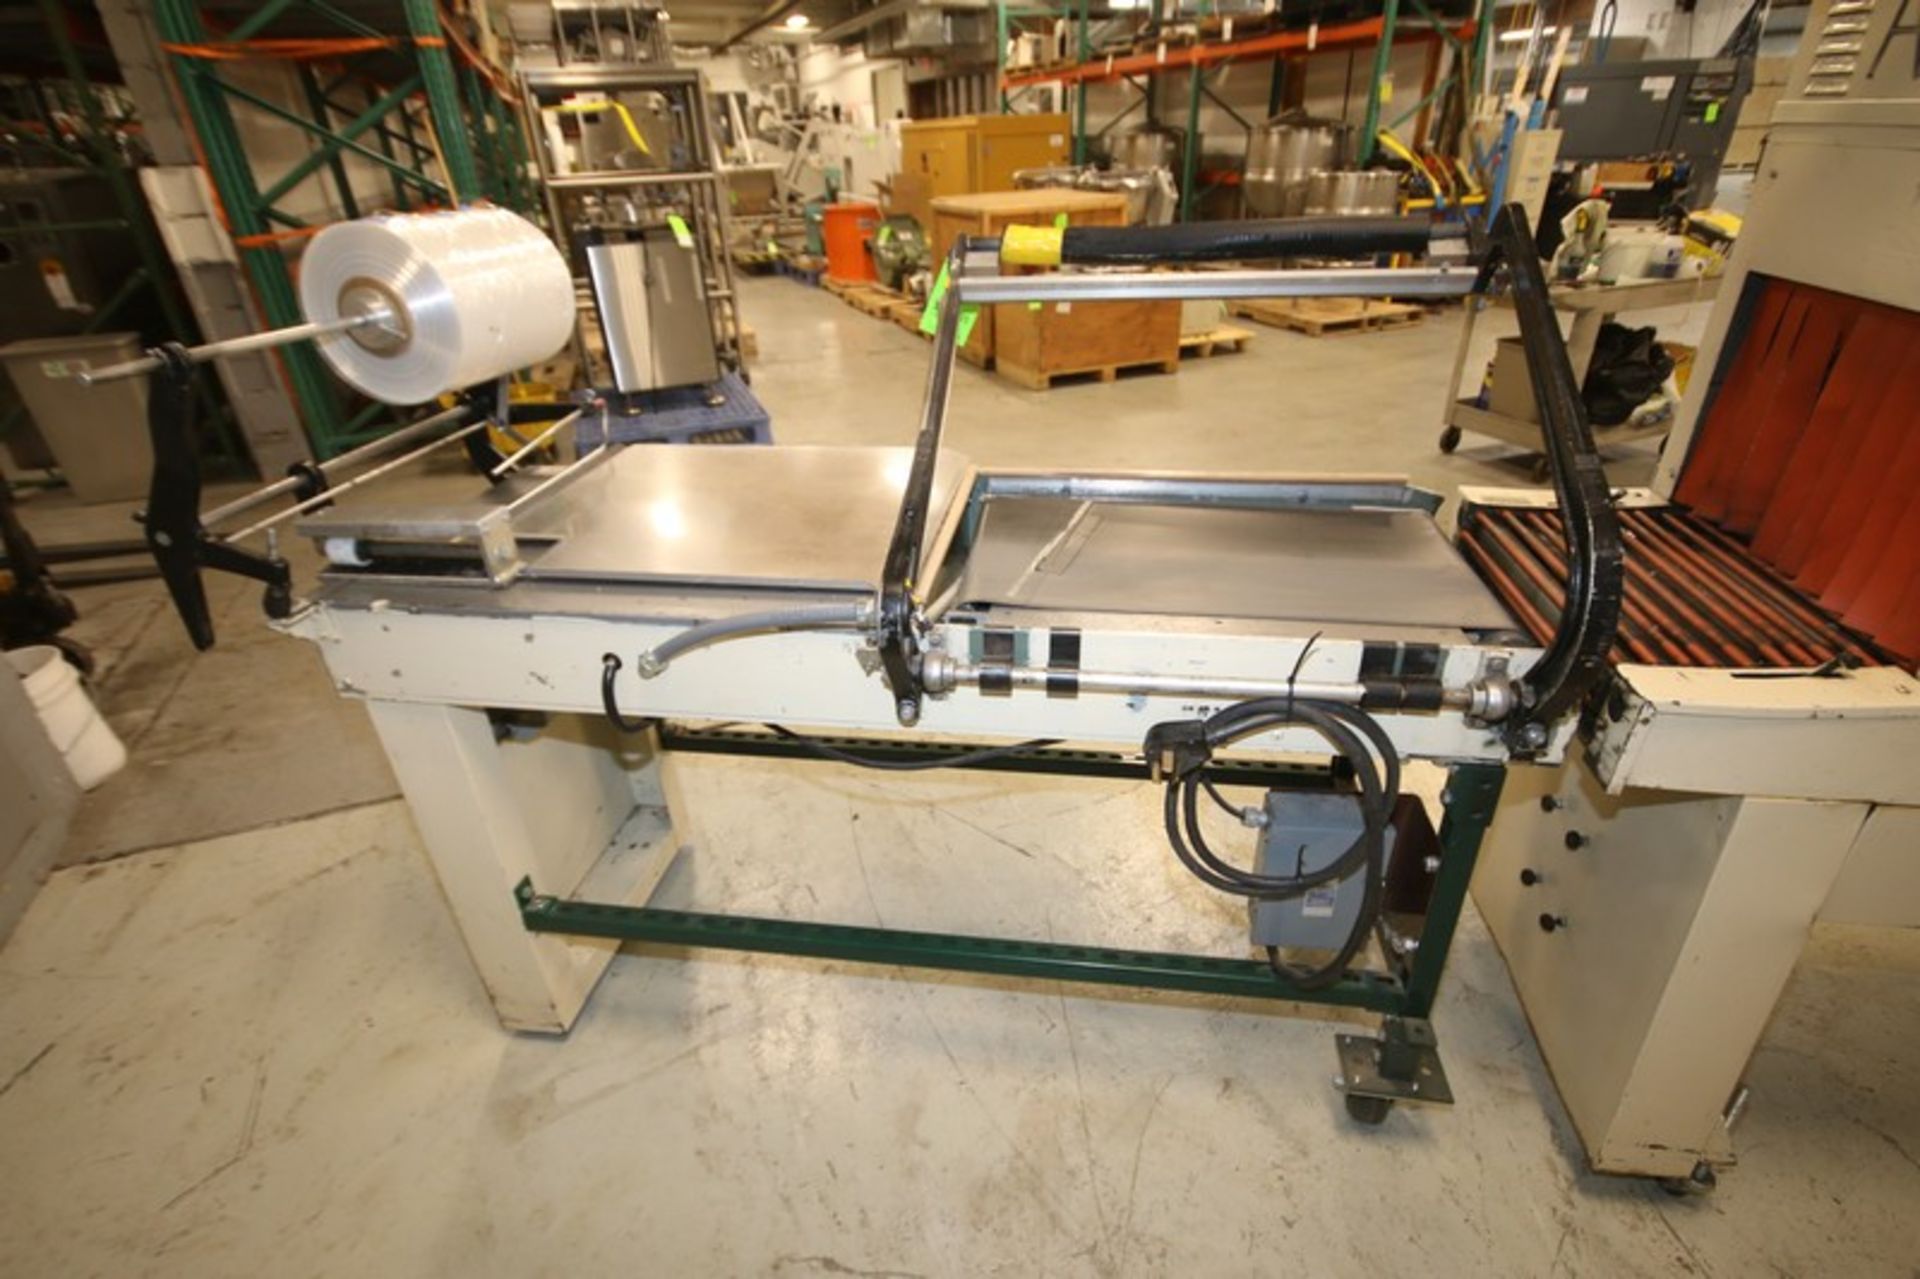 Weldotron 28" L Bar Sealer with 16" W Belt Conveyor, 12" W Roll of Wrap with 46" L Shrink Tunnel, - Image 6 of 13